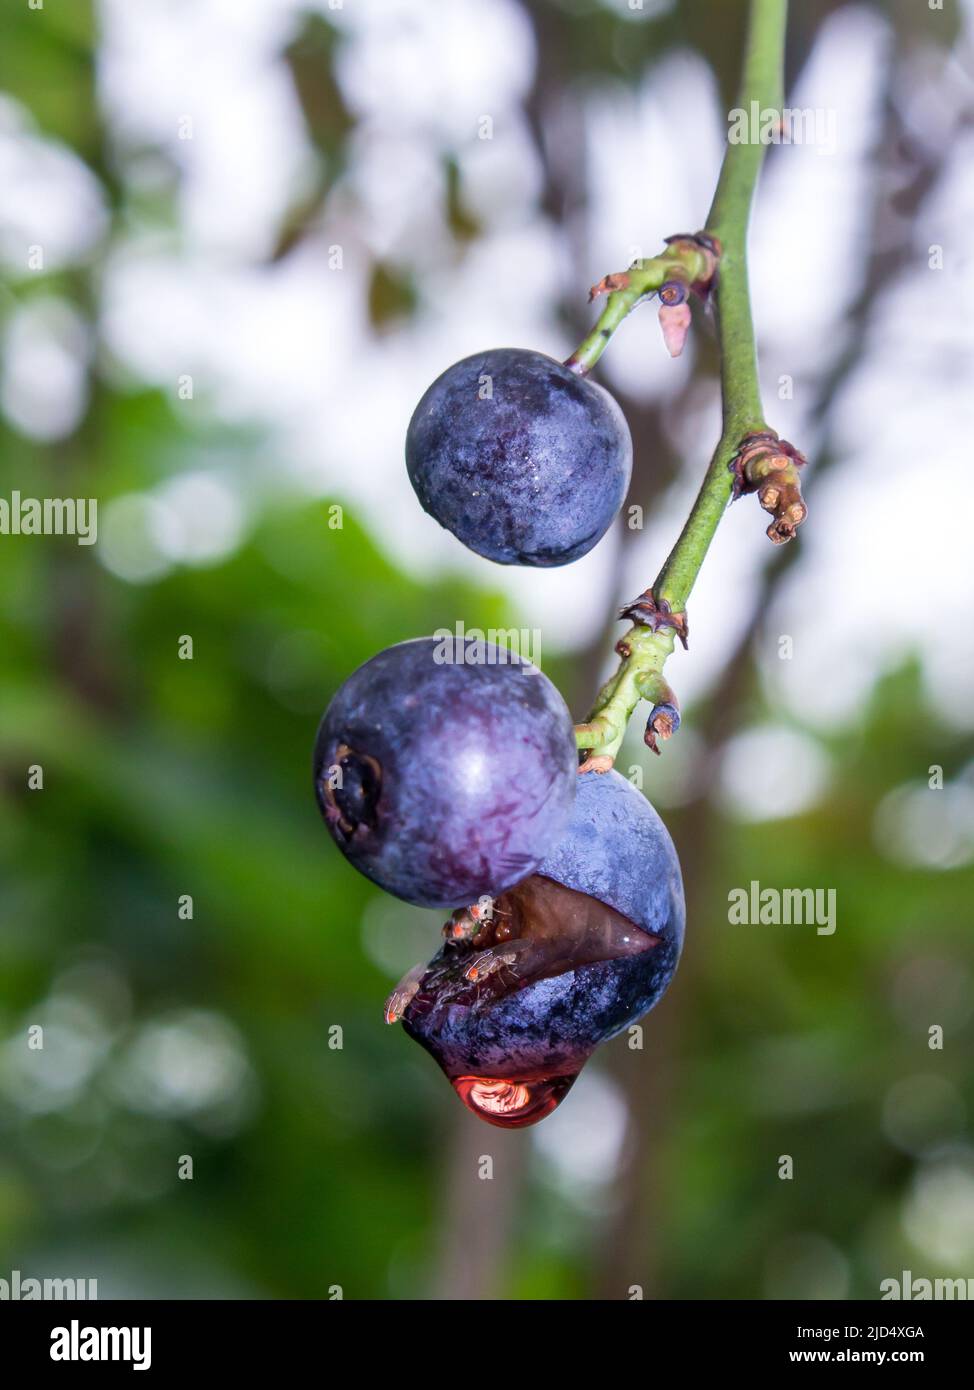 Small fruit flies in a blue blueberry which had burst open while still on the plant Stock Photo